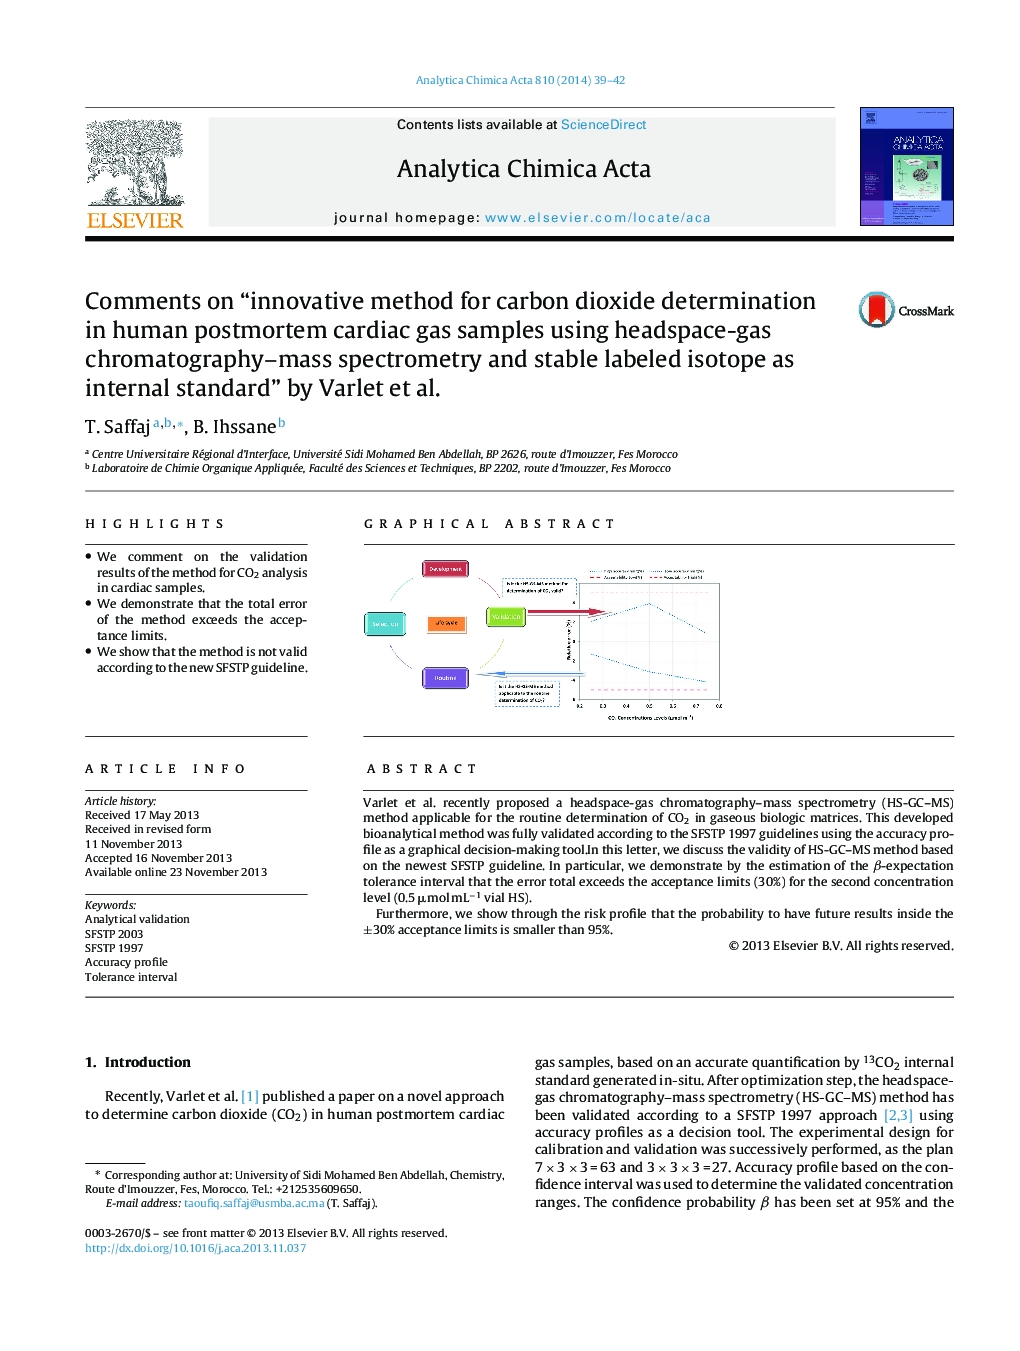 Comments on “innovative method for carbon dioxide determination in human postmortem cardiac gas samples using headspace-gas chromatography-mass spectrometry and stable labeled isotope as internal standard” by Varlet et al.